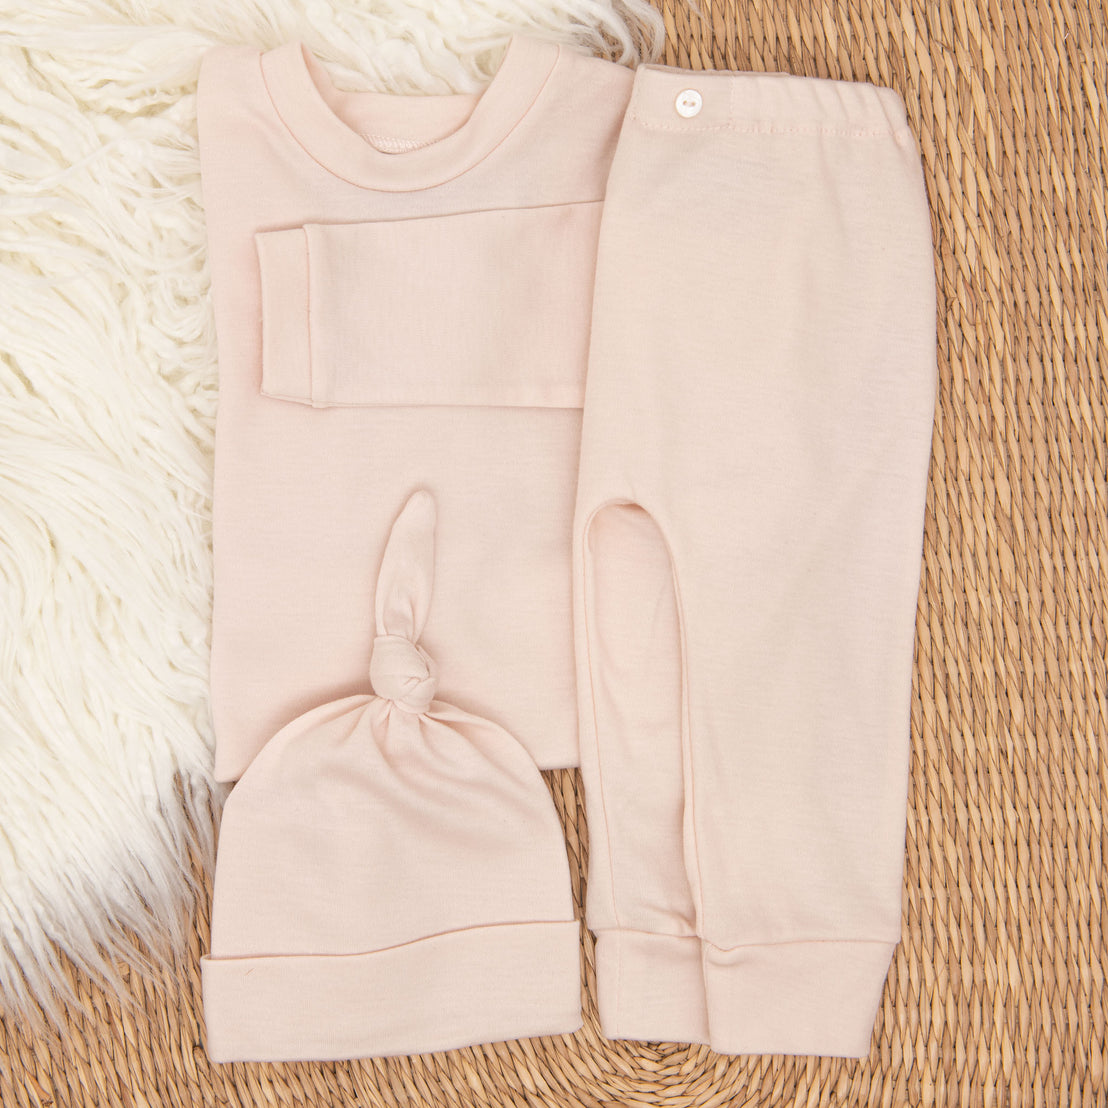 The blush pink Ava Pima Top & Leggings coming home outfit including a long-sleeved pima cotton shirt, pants, and matching knotted cap, displayed folded on a wicker basket with a white fluffy rug beneath.